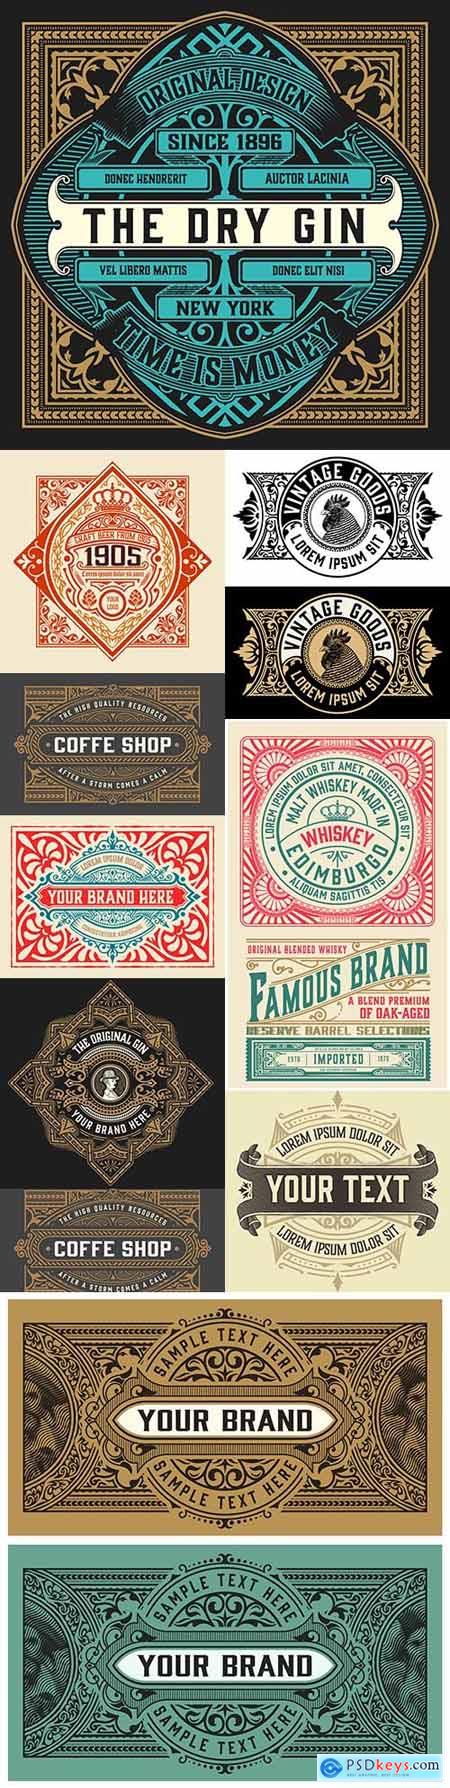 Vintage label whiskey with decorative elements